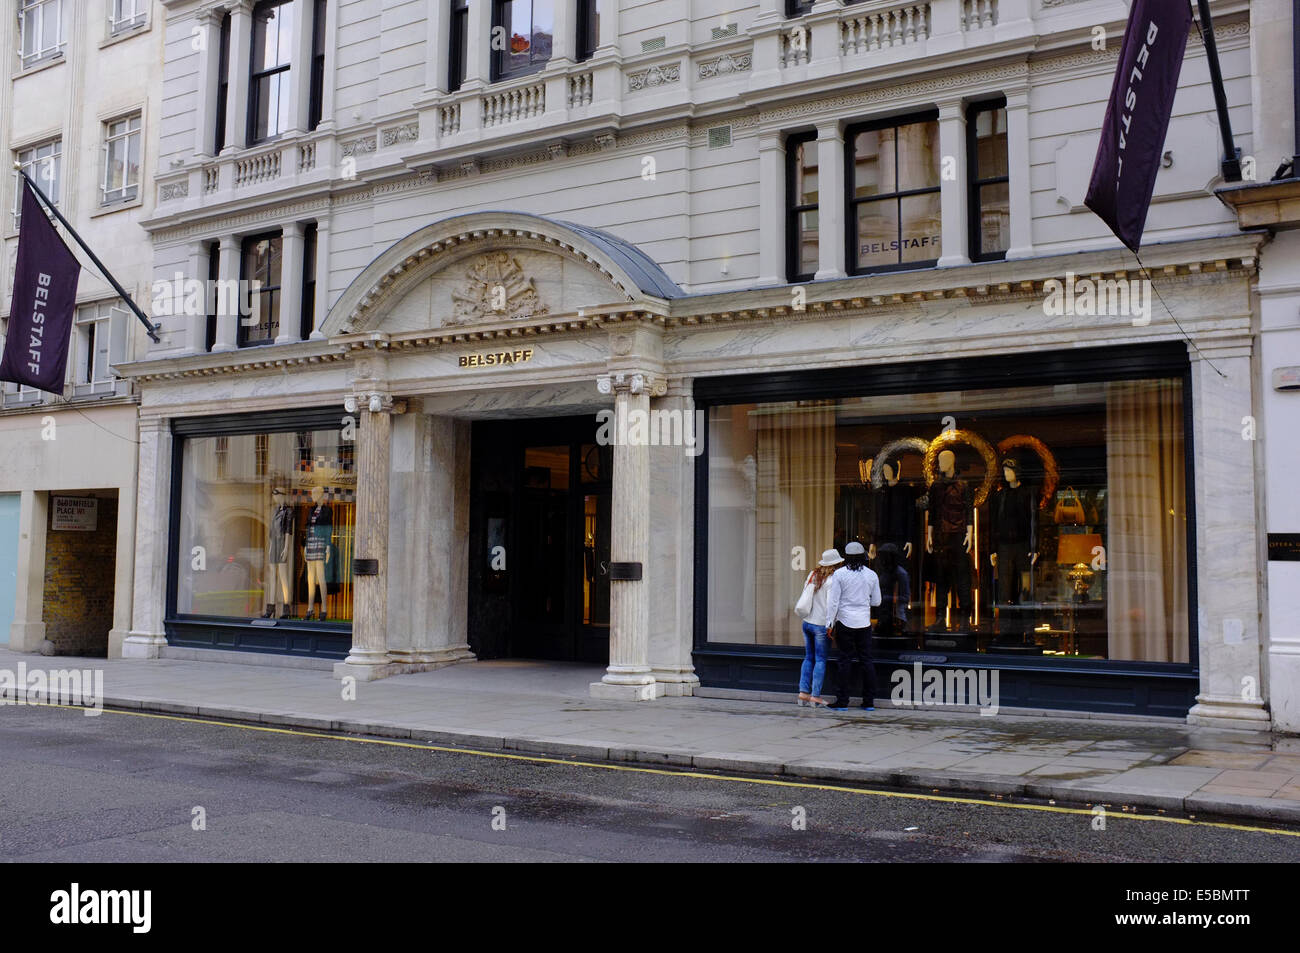 Belstaff Store High Resolution Stock Photography and Images - Alamy